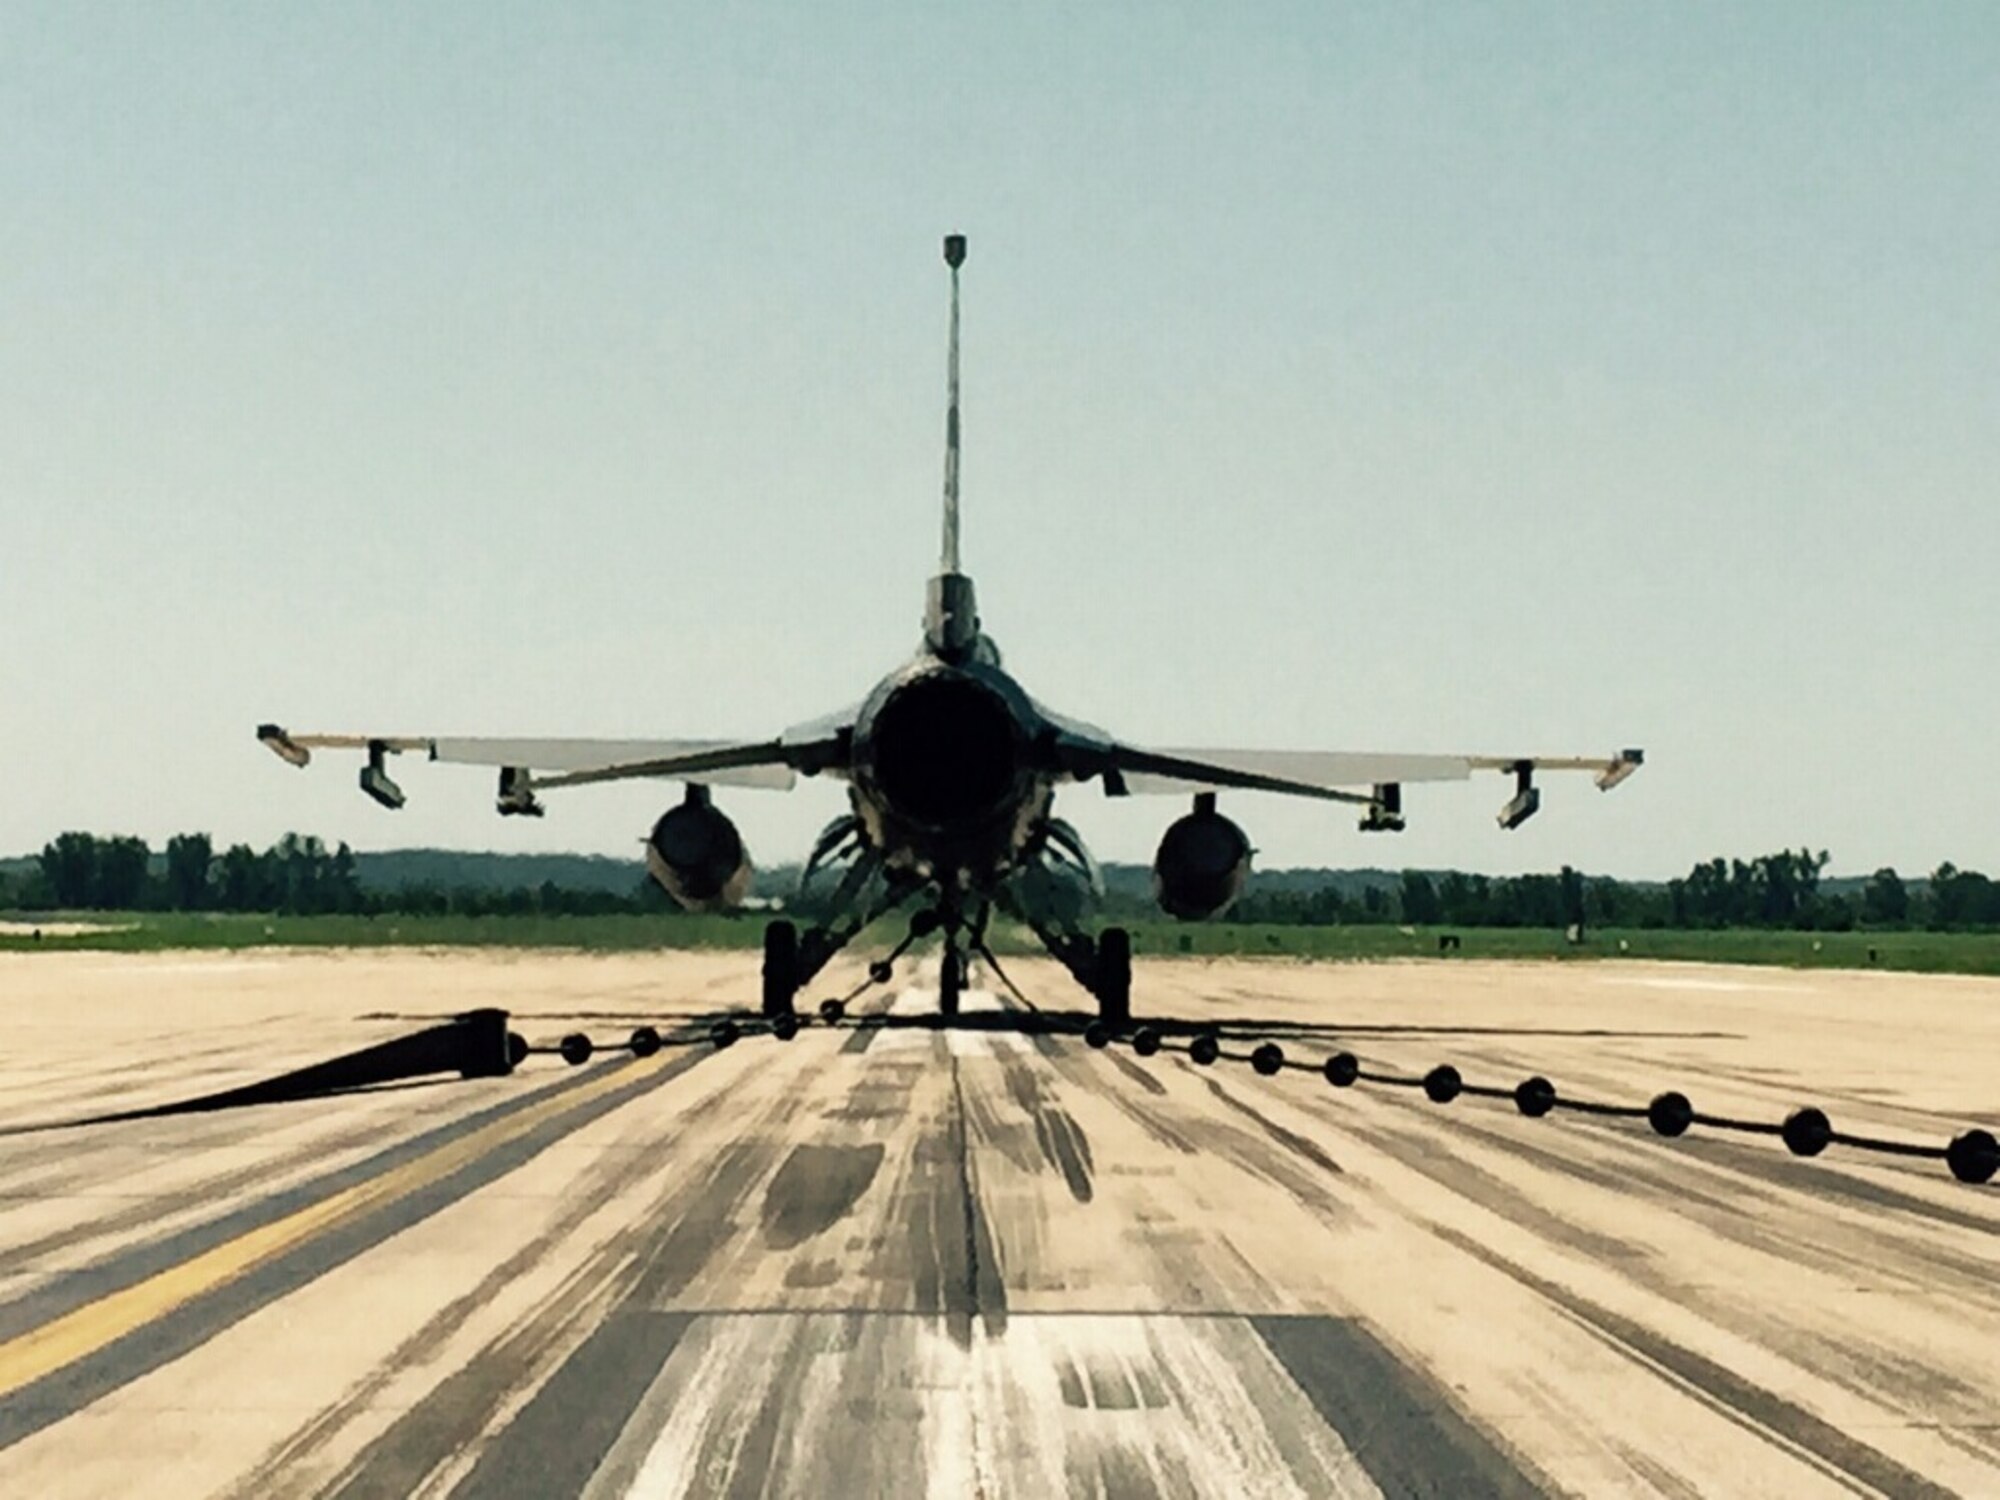 An F-16 Fighting Falcon from the 180th Fighter Wing, Ohio Air National Guard, sits on the runway at Rosecrans Air National Guard Base, St. Joseph, Mo., June 8, 2015. The aircraft was used to test and certify the use of a mobile aircraft arresting system, or MAAS, on the runway. The temporary MAAS will be deployed at Rosecrans during the Wings Over Whiteman Airshow at Whiteman Air Force Base as a backup for the U.S. Air Force Thunderbirds if they need to make an emergency arrestment landing. (U.S. Air Force photo by Senior Airman Charles Puengpan)